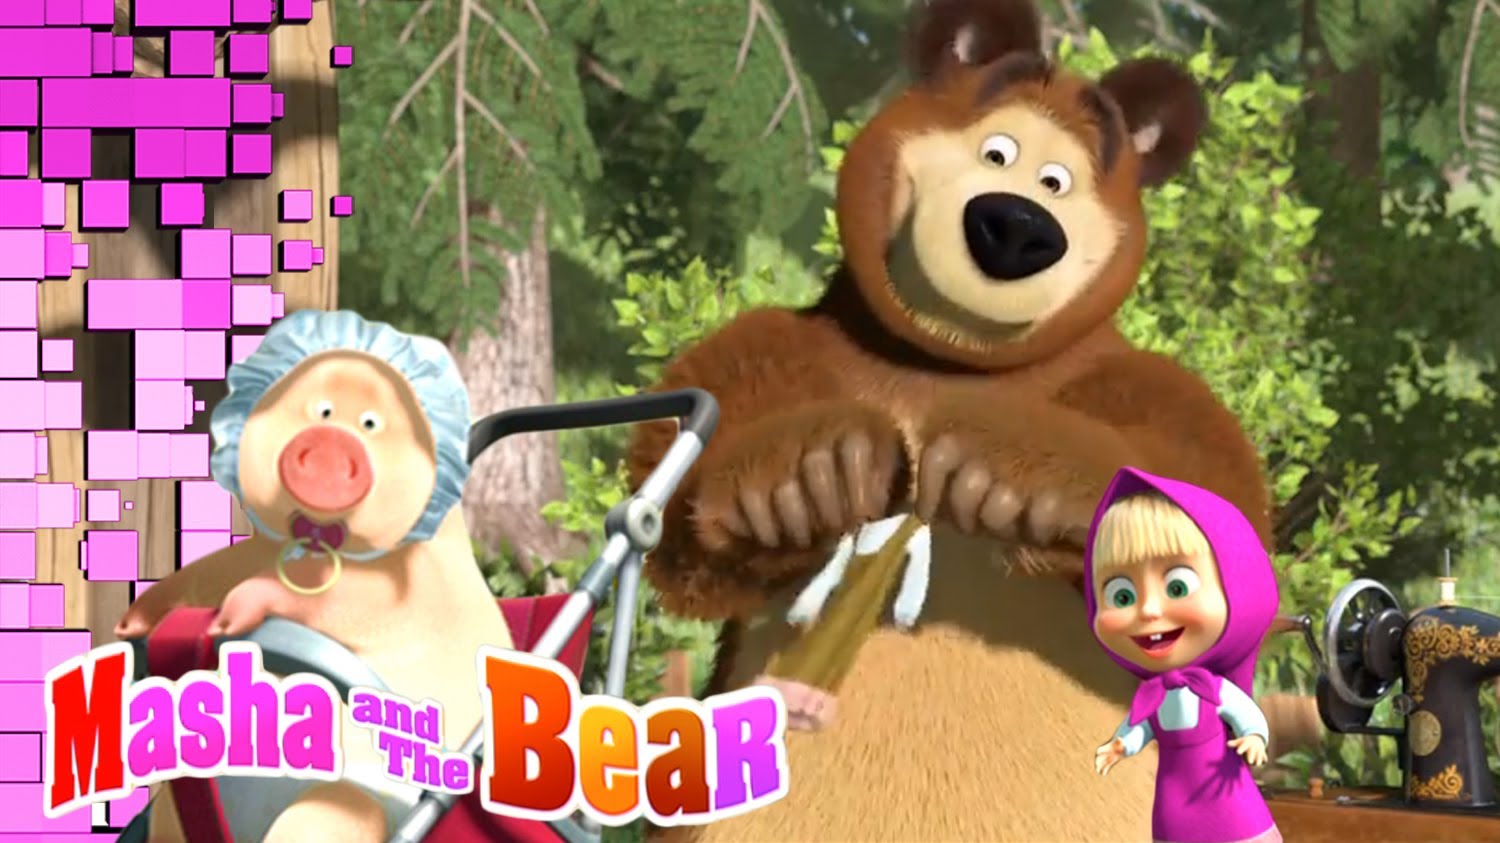 Masha And The Bear - Masha And The Bear Laudry Day , HD Wallpaper & Backgrounds